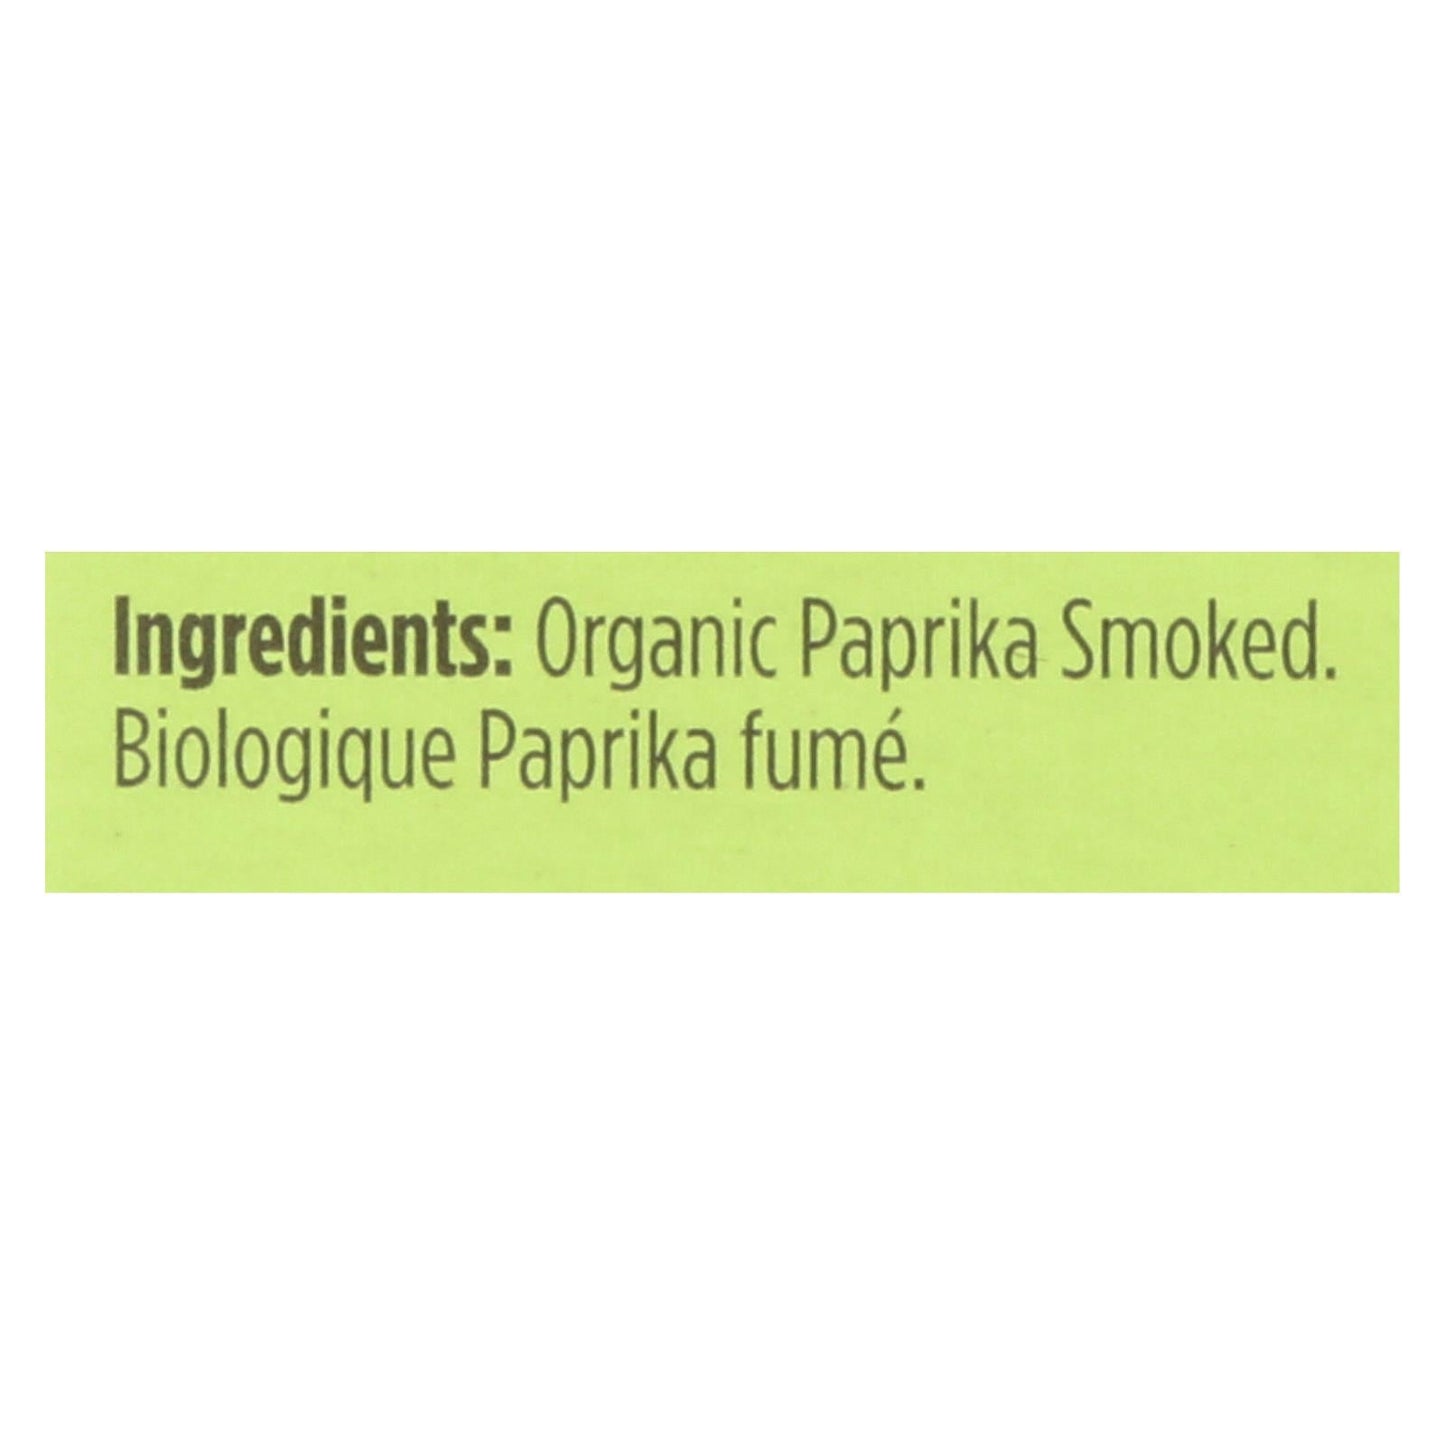 Buy Spicely Organics - Organic Paprika - Smoked - Case Of 6 - 0.45 Oz.  at OnlyNaturals.us